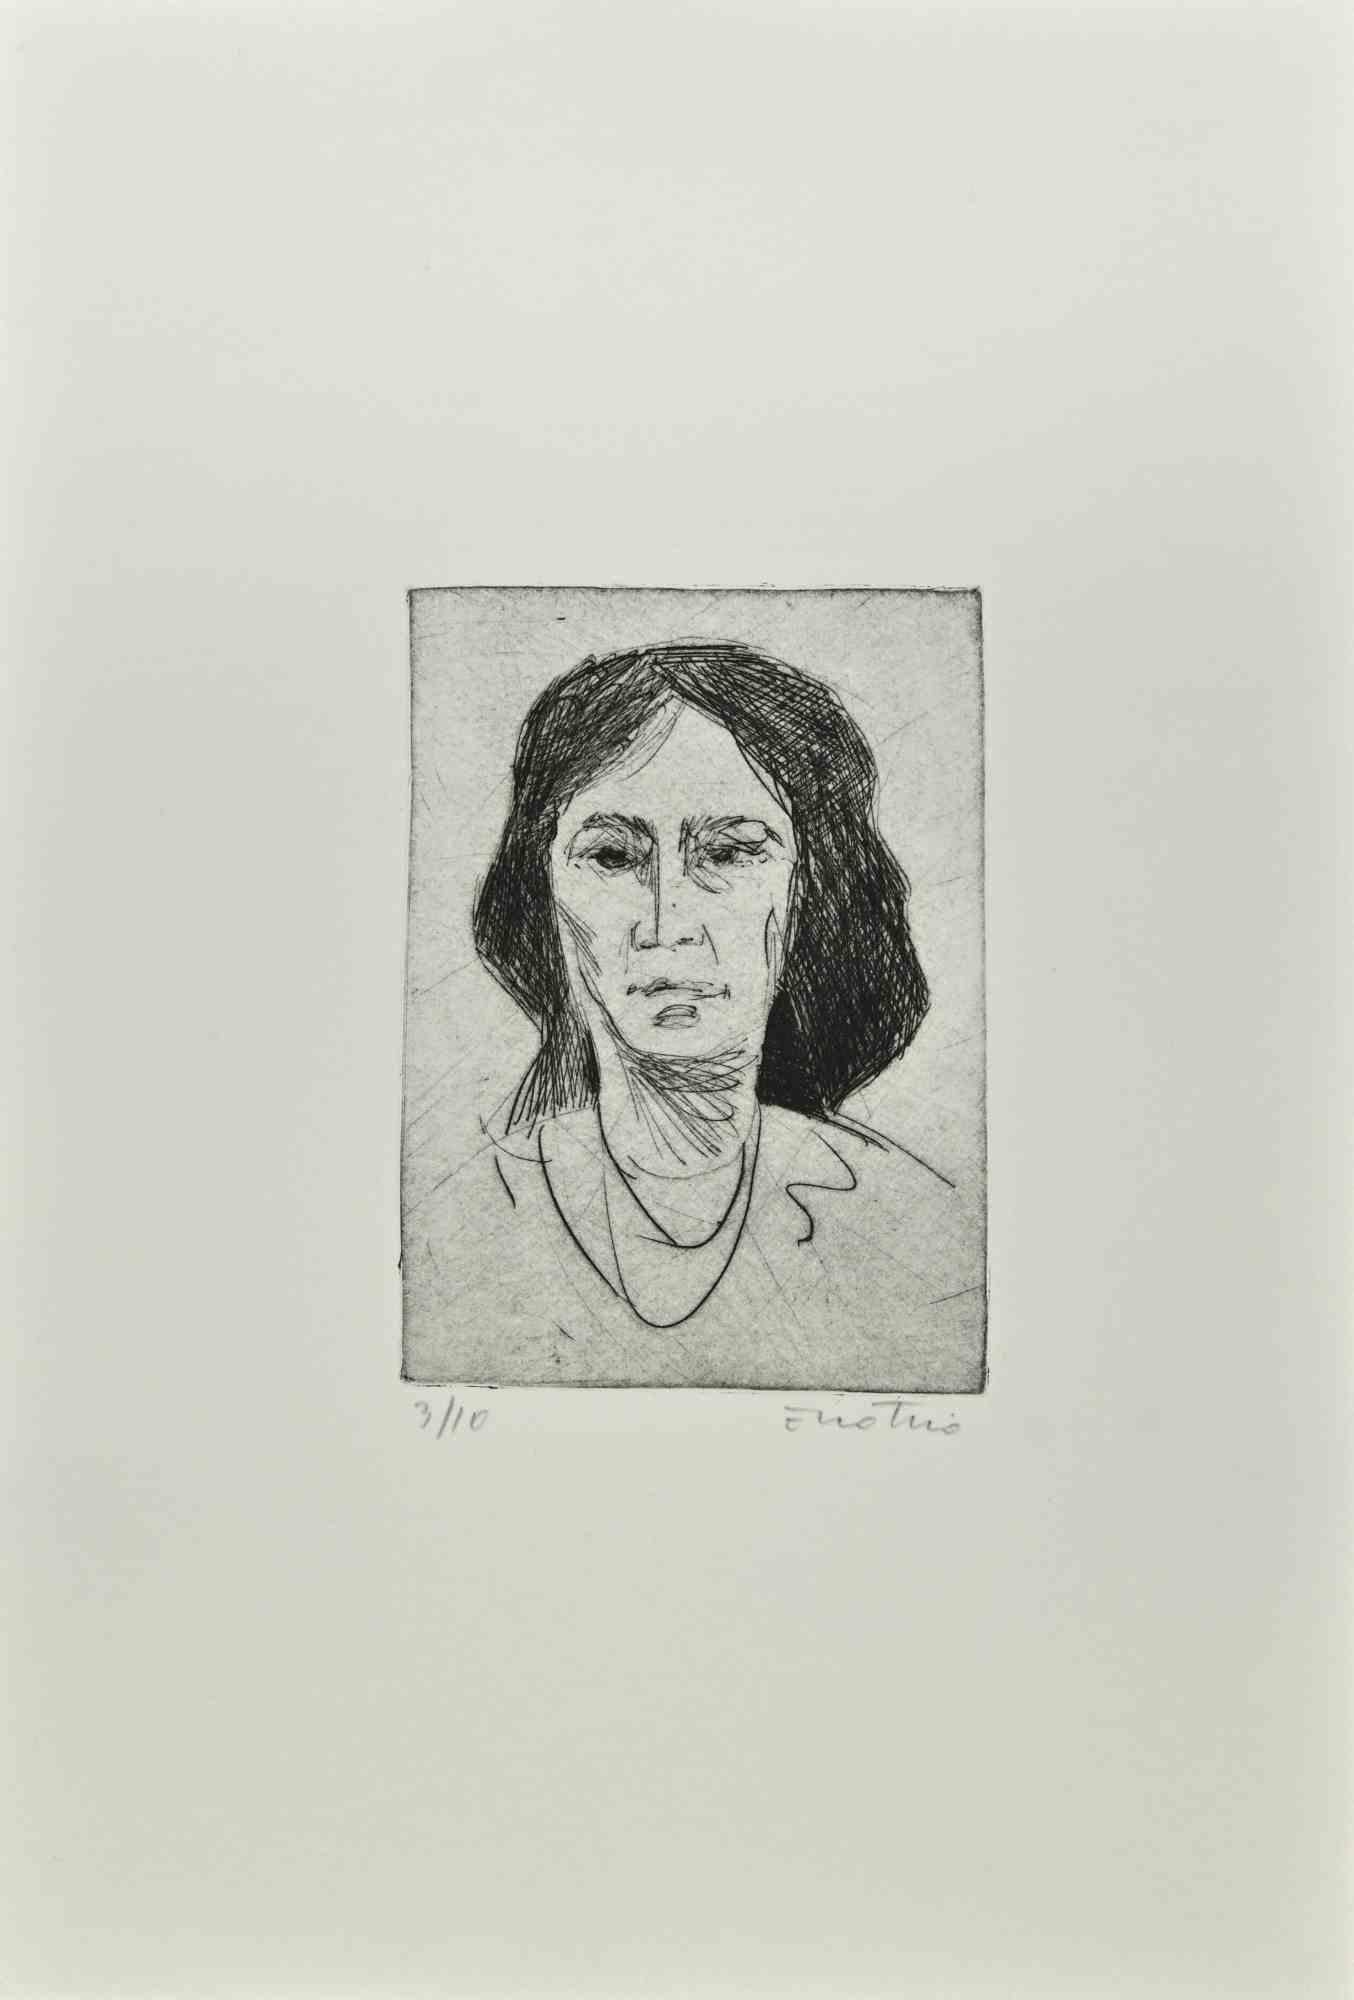 Woman is an Etching realized by Enotrio Pugliese in 1963.

Limited edition of 10 copies numbered and signed by the artist.

Good condition on a white cardboard.

Enotrio Pugliese (May 11, 1920 - August 1989) was an Italian painter. Born in Buenos